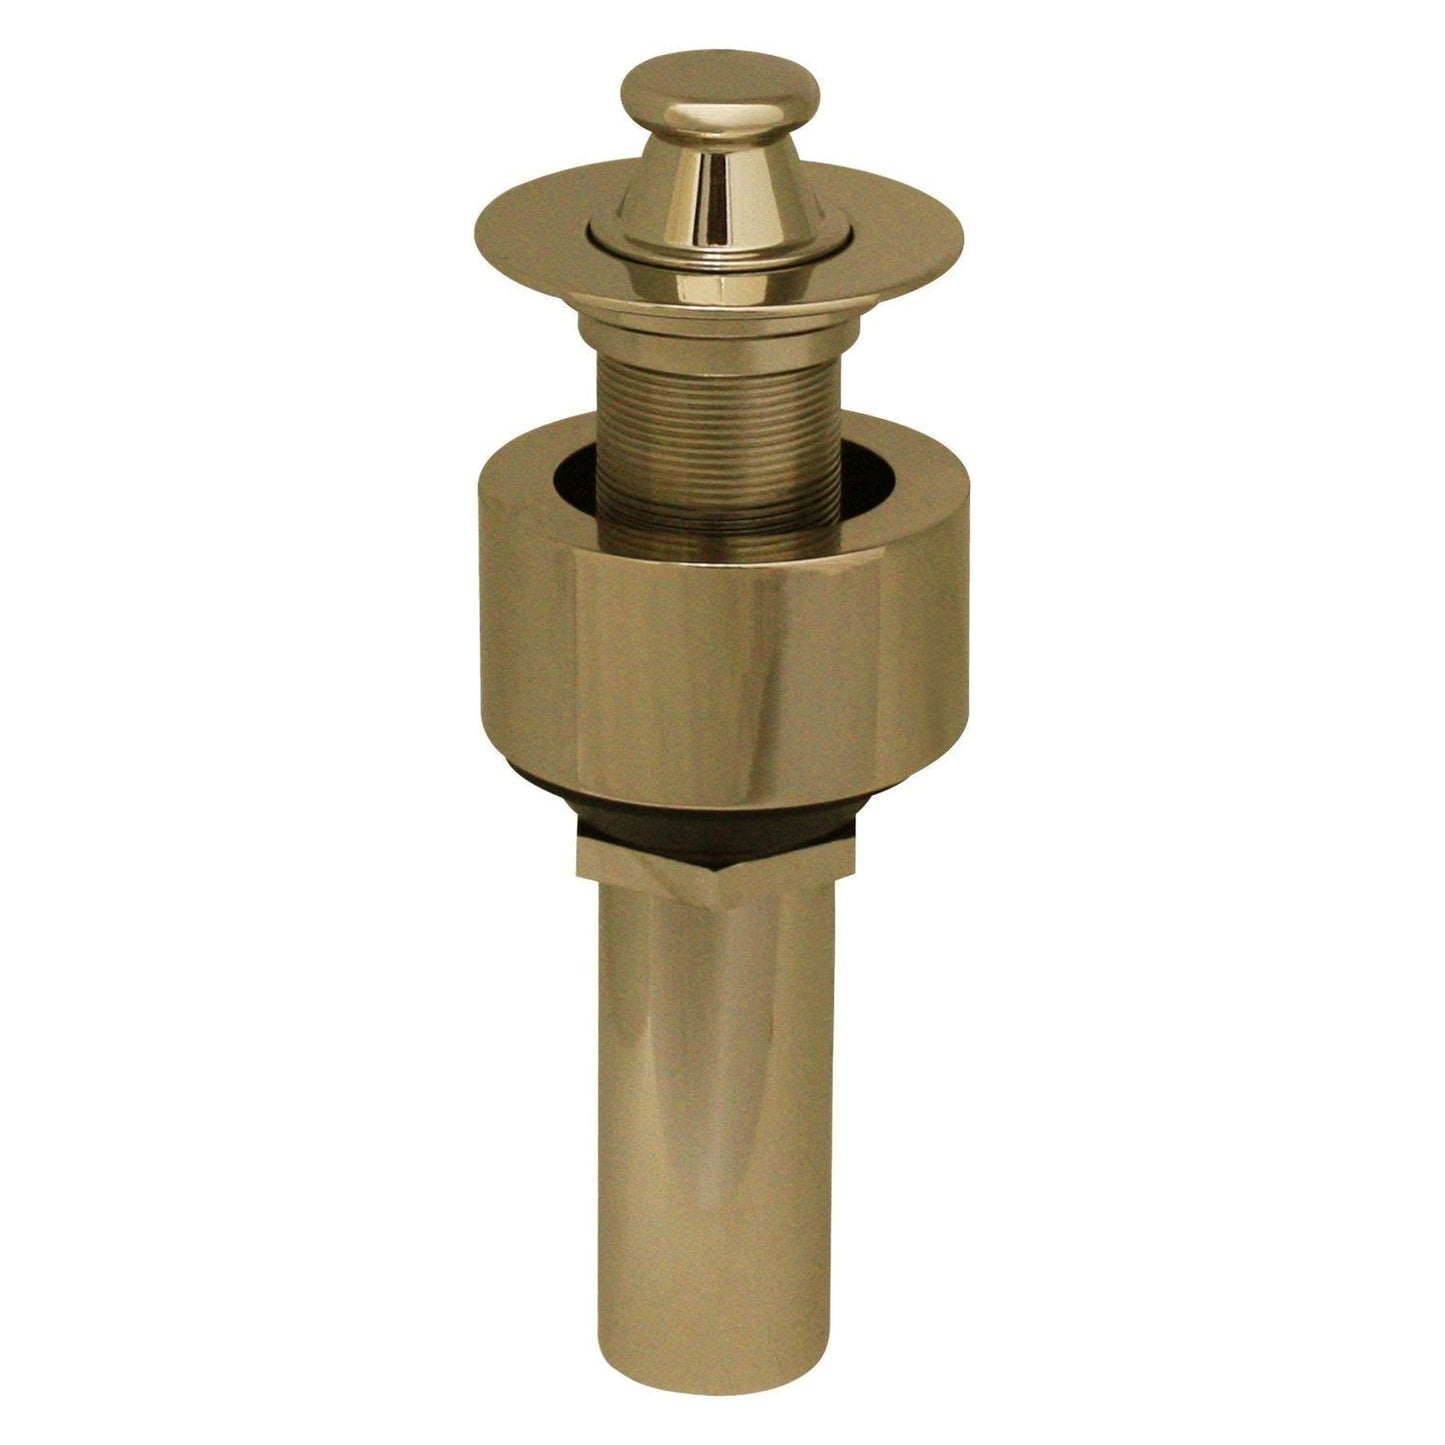 Whitehaus 10.615-B Polished Brass Lift and Turn Drain With Pull-up Plug for Above Mount Installation